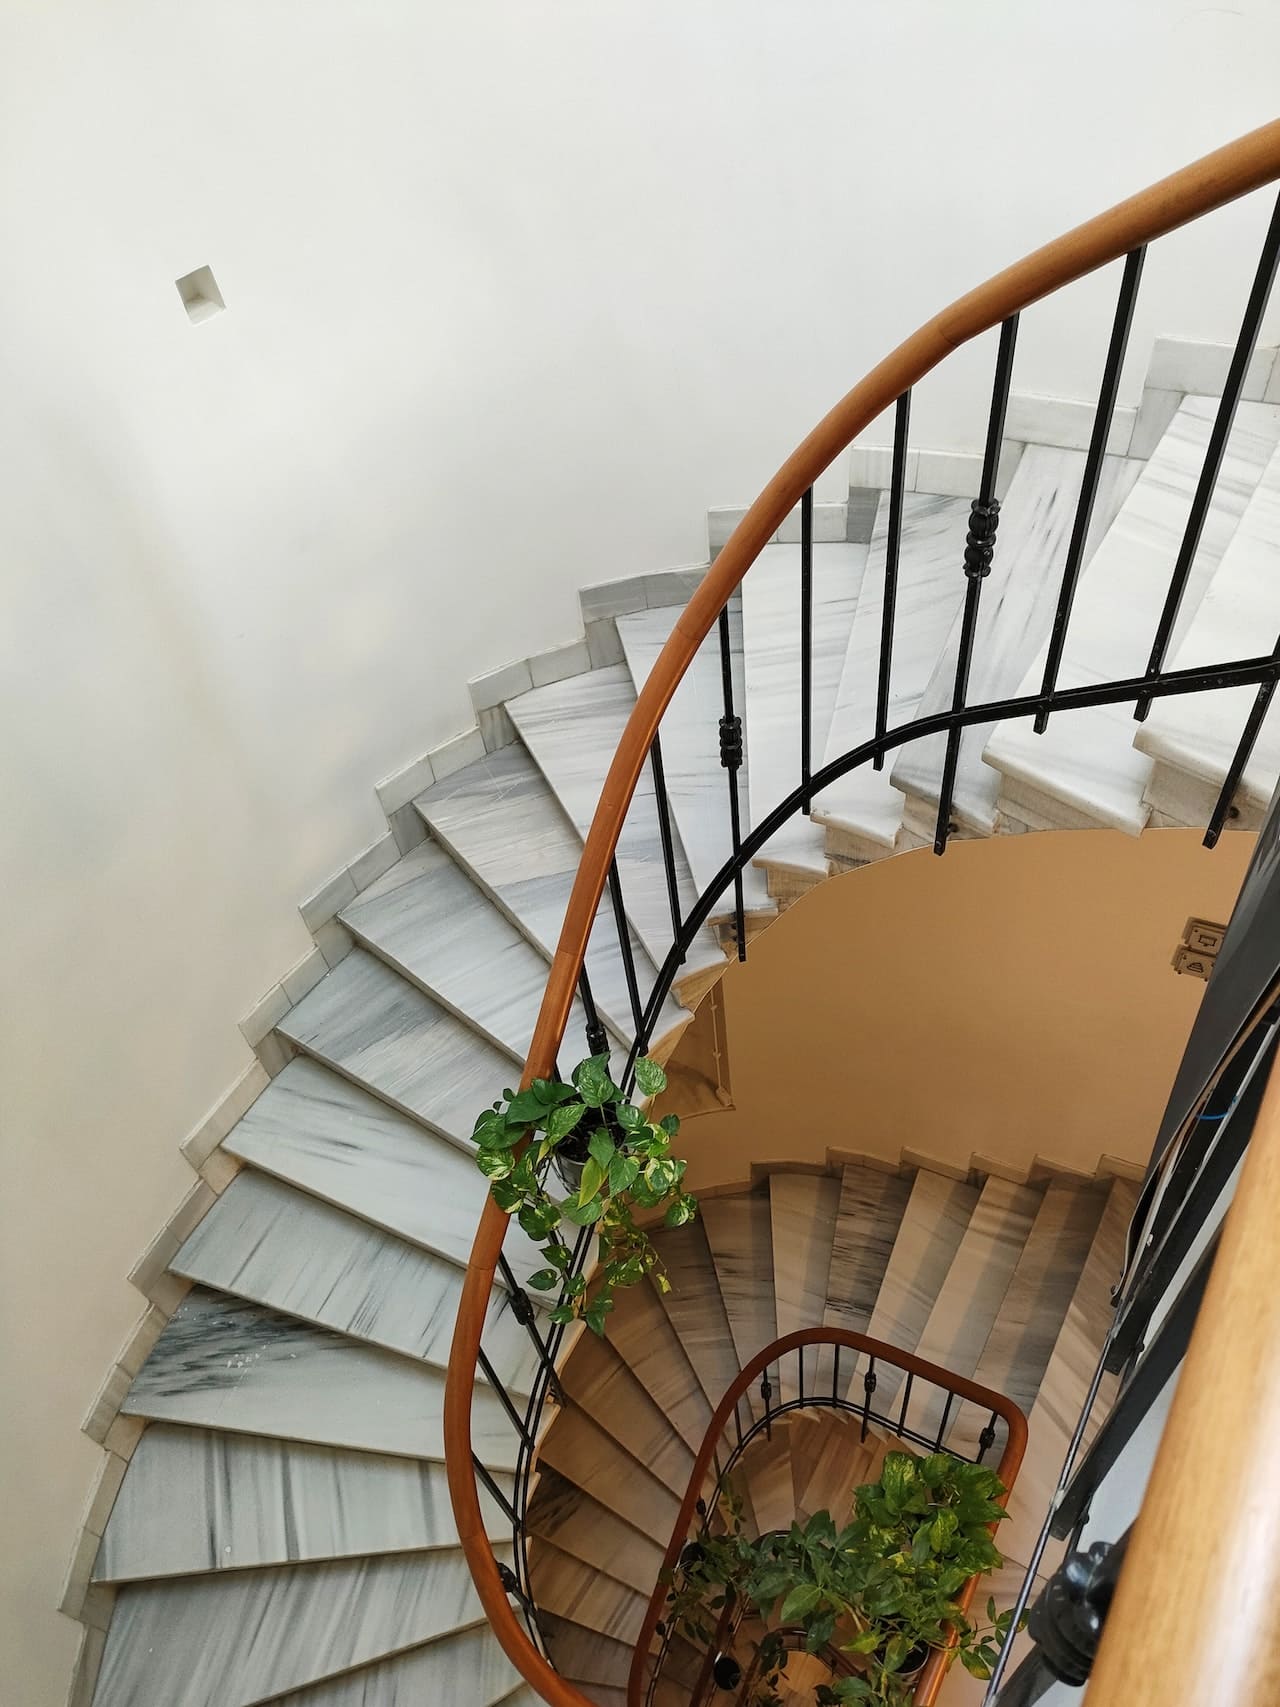 An elegant spiral staircase with metal railings and marble footsteps